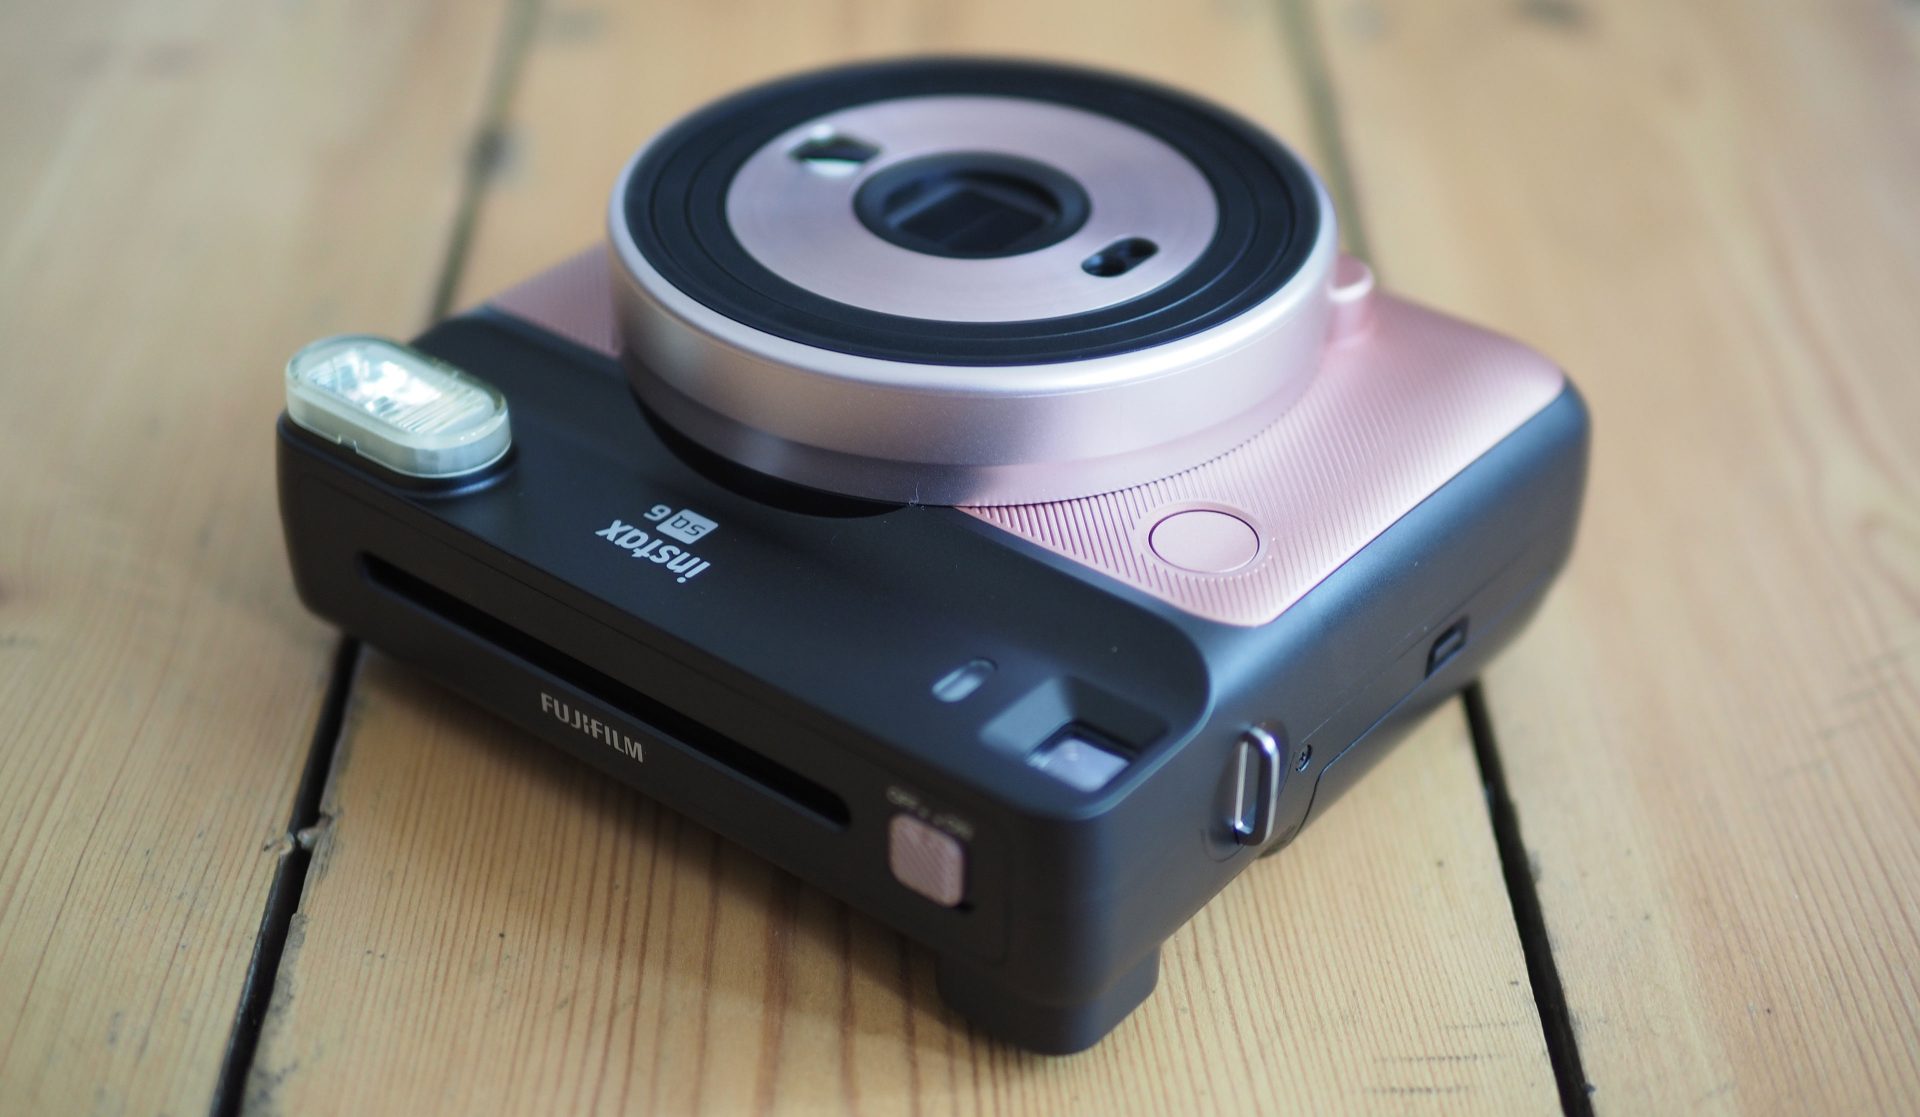 plus Onhandig accessoires Fujifilm Instax SQ6 review | Cameralabs